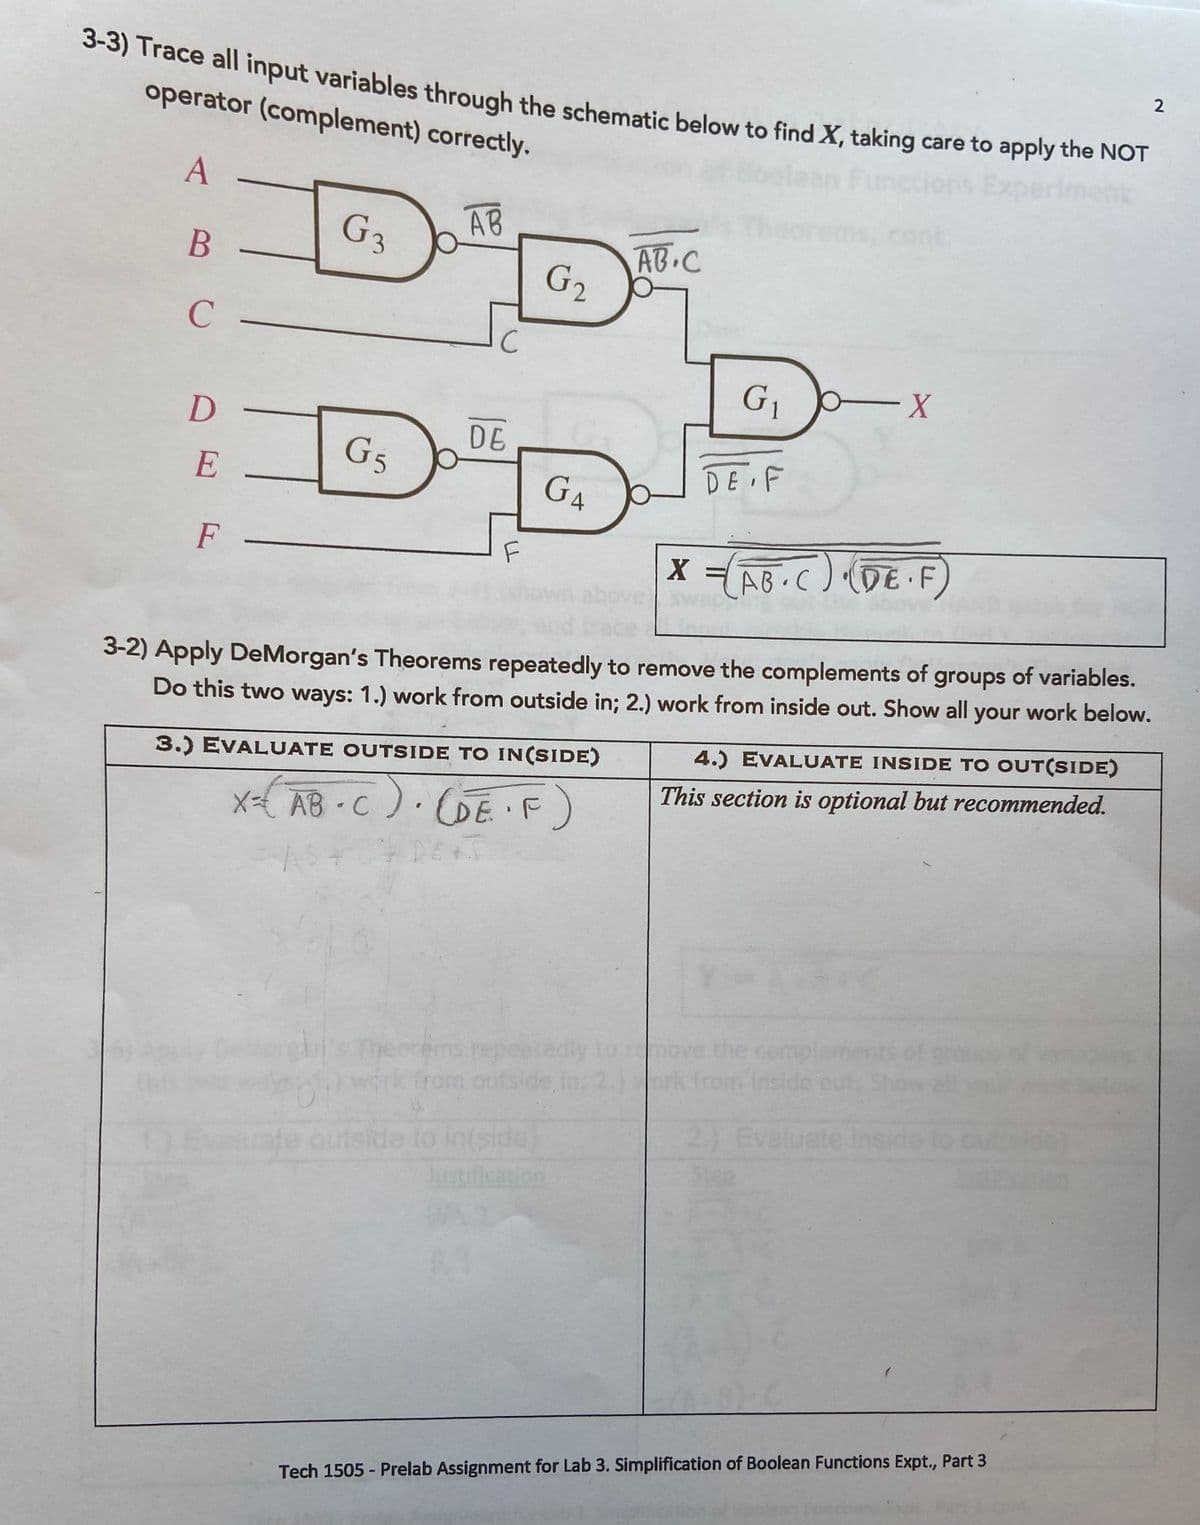 3-3) Trace all input variables through the schematic below to find X, taking care to apply the NOT
S) Trace all input variables through the schematic below to find X, taking care to apply the NoT
operator (complement) correctly.
2
Exp
A
G3
AB
cont.
AB.C
G2
B
C
X-
DE
G5
DE F
E
G4
F
F
X - AB C) (DE F
Sw
3-2) Apply DeMorgan's Theorems repeatedly to remove the complements of groups of variables.
Do this two ways: 1.) work from outside in; 2.) work from inside out. Show all your work below.
4.) EVALUATE INSIDE TO OUT(SIDE)
3.) EVALUATE OUTSIDE TO IN(SIDE)
This section is optional but recommended.
x-{ AB-C). (GE F
DET
GE'F)
the cempt
Deorems repeetedy
work from outside in; 2.)ork from inside ou
2.) Evaluate inside
de)
Euate outside to in(side)
brstification
Tech 1505 - Prelab Assignment for Lab 3. Simplification of Boolean Functions Expt., Part 3
